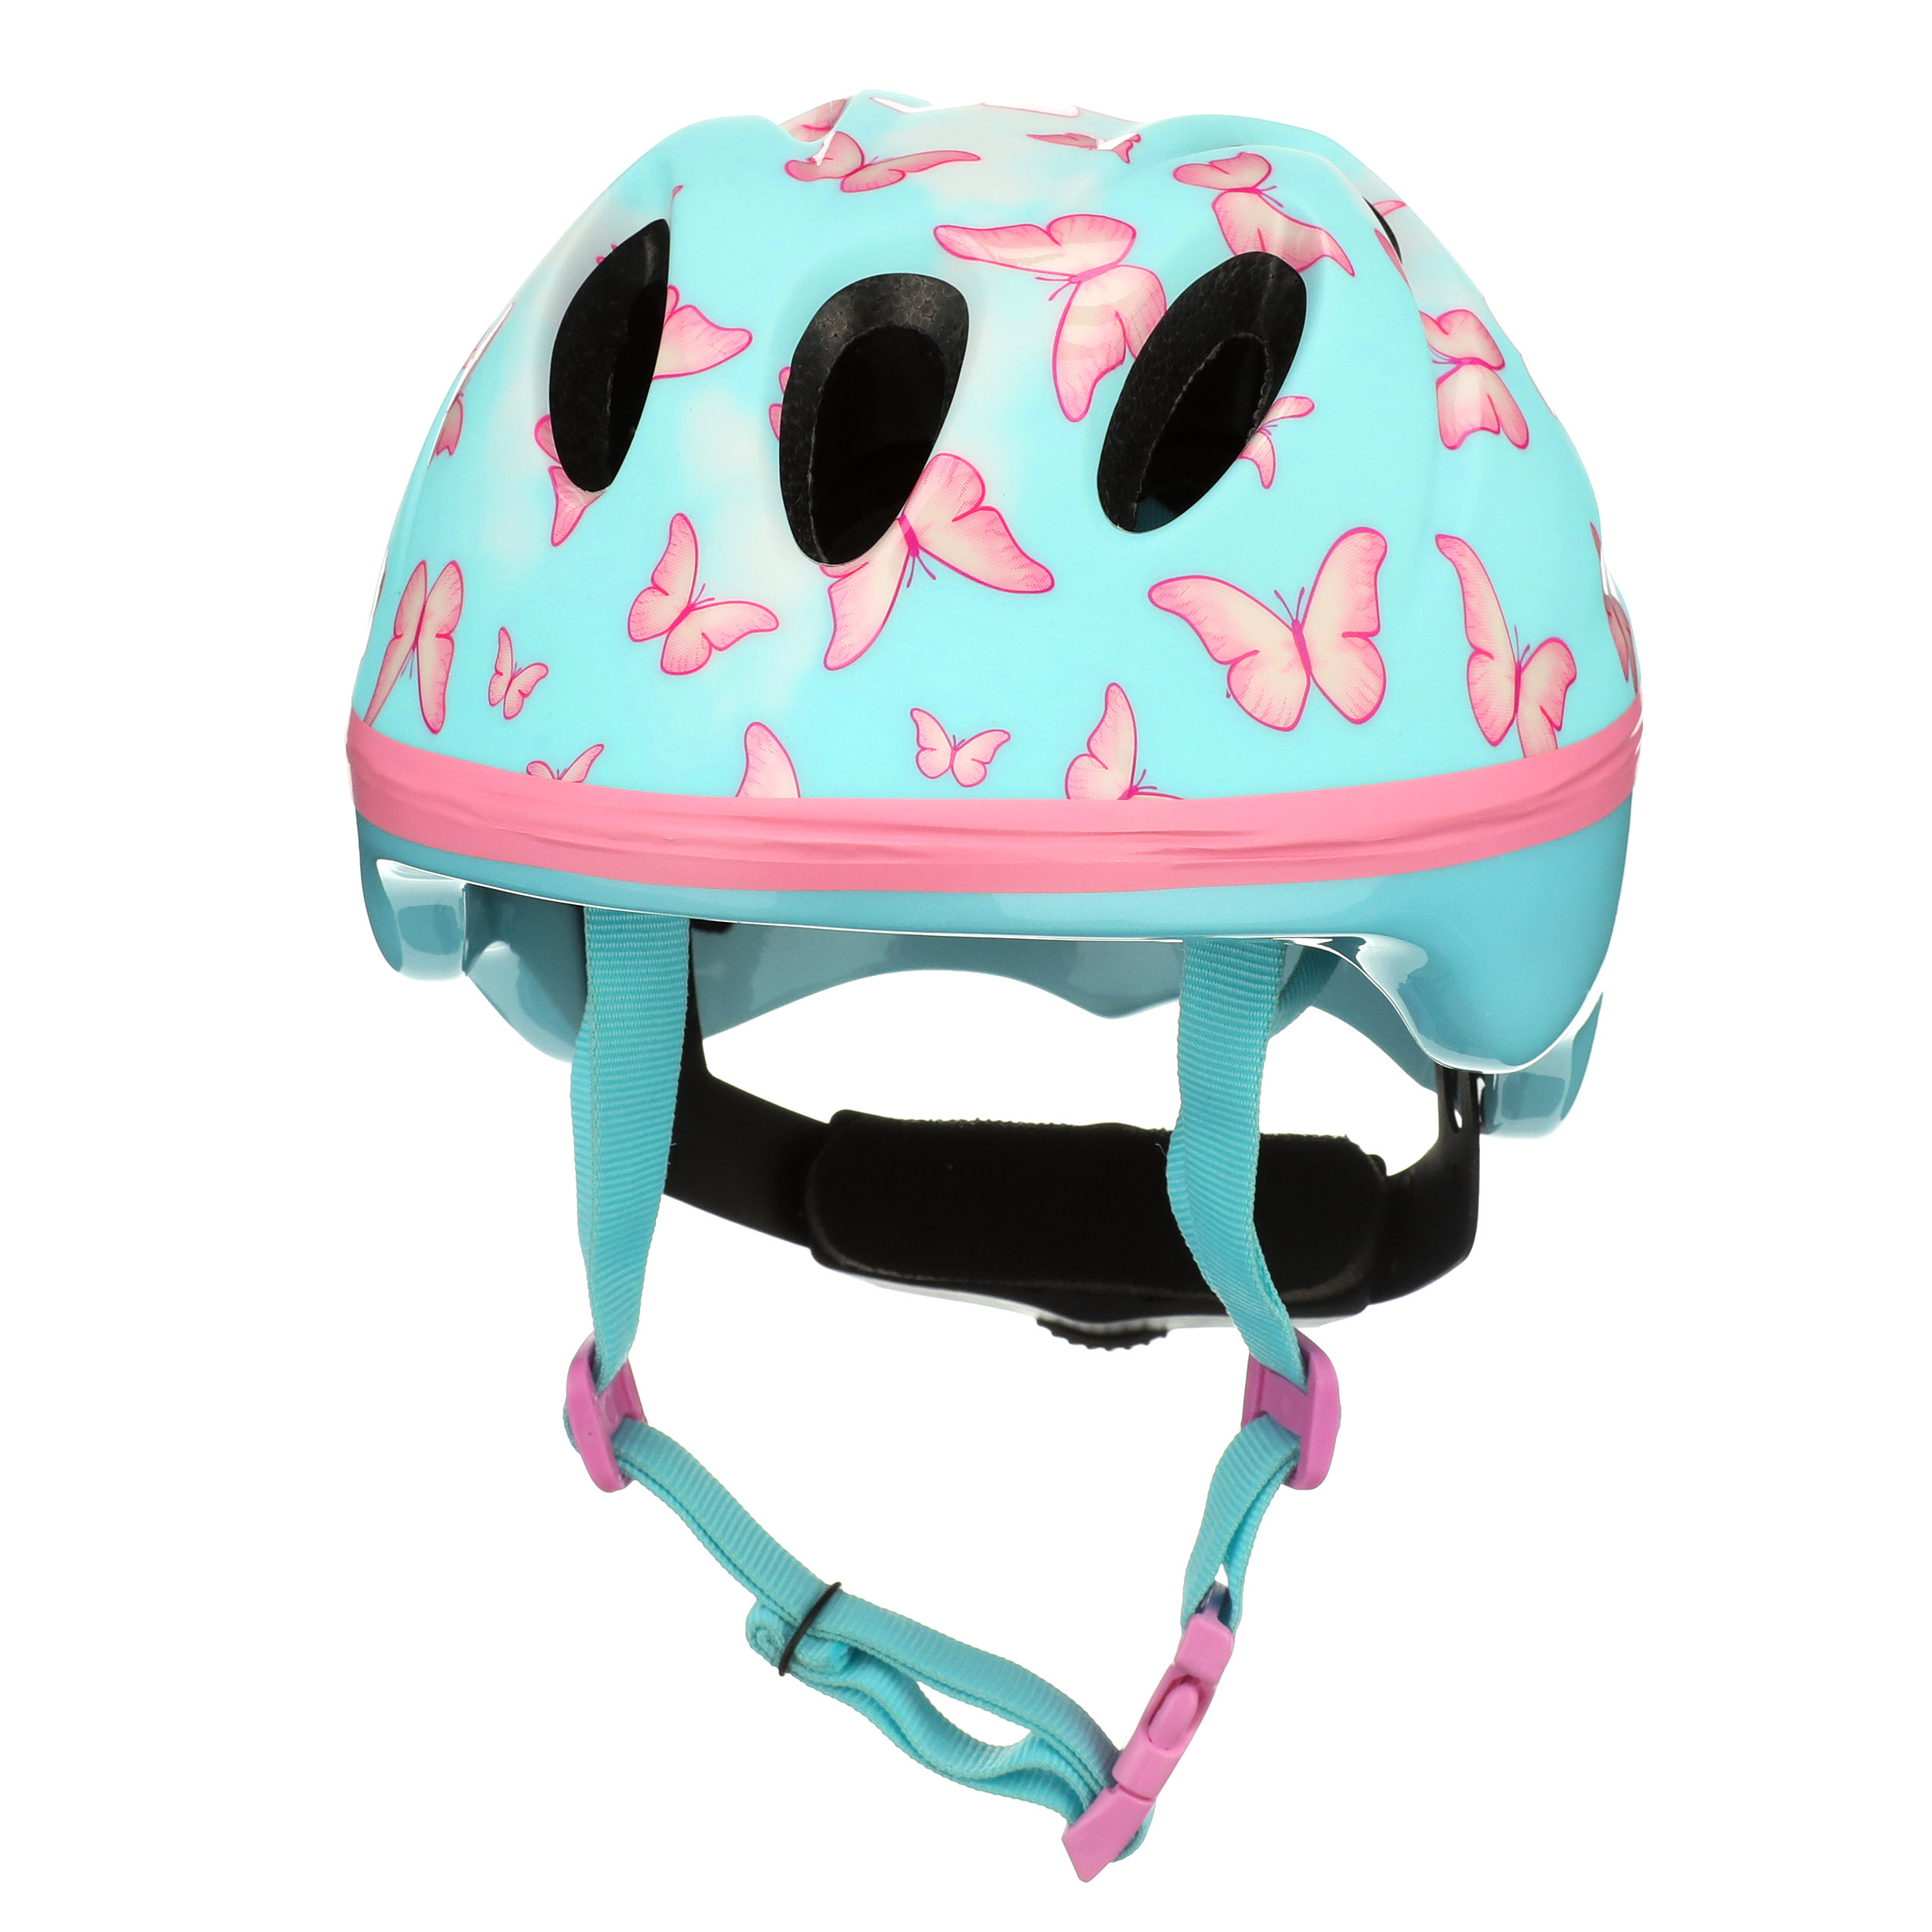 schwinn infant ages 0 to 3 butterfly design bicycle helmet